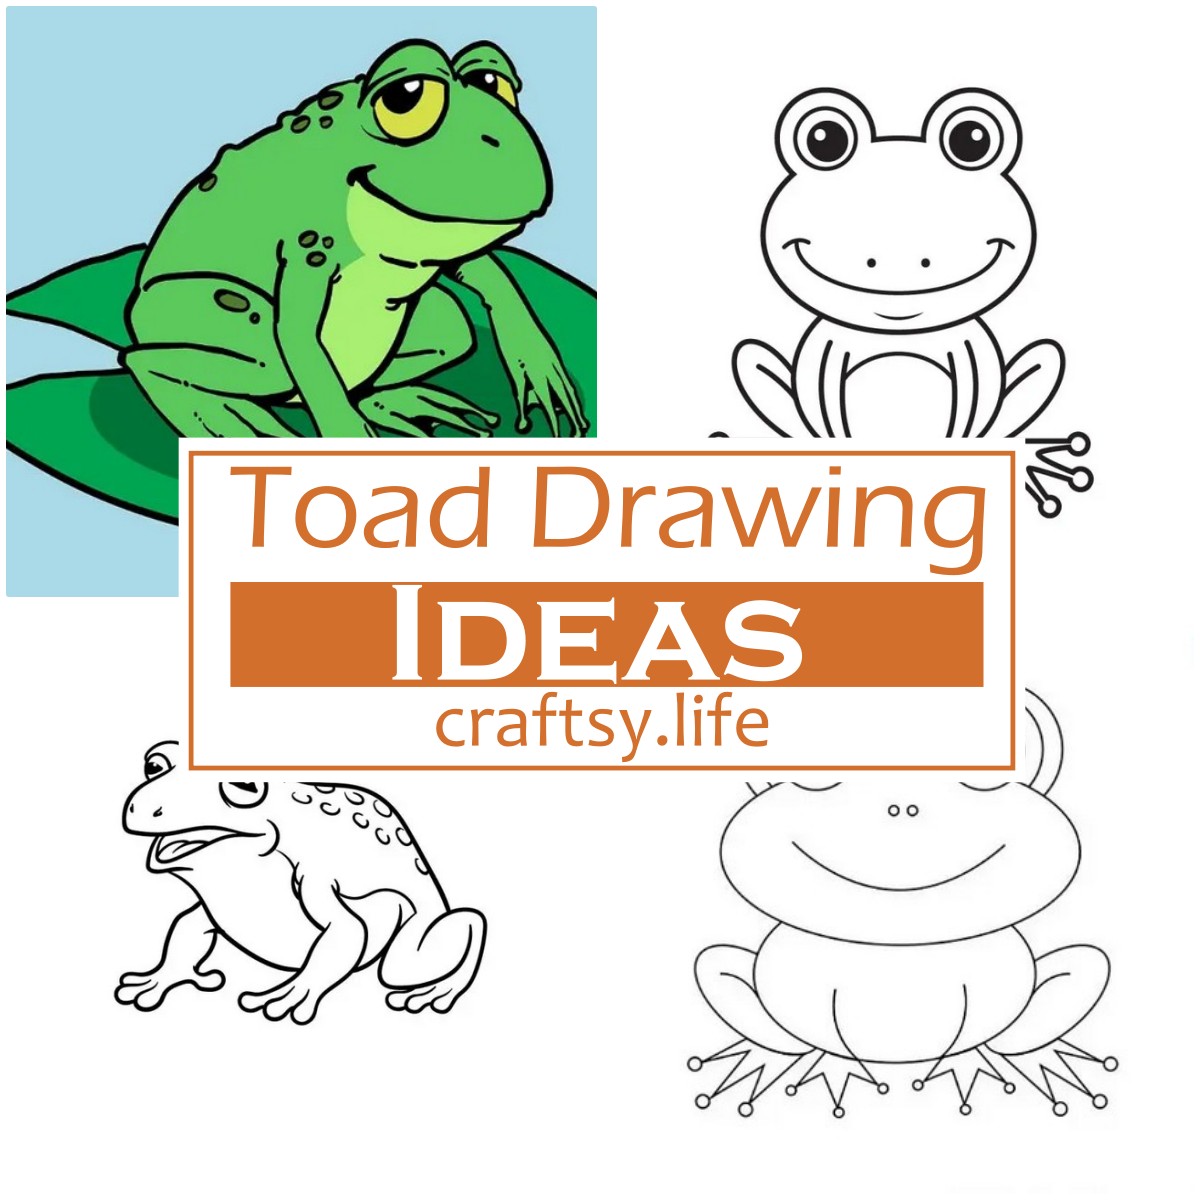 Toad Drawing Ideas 1